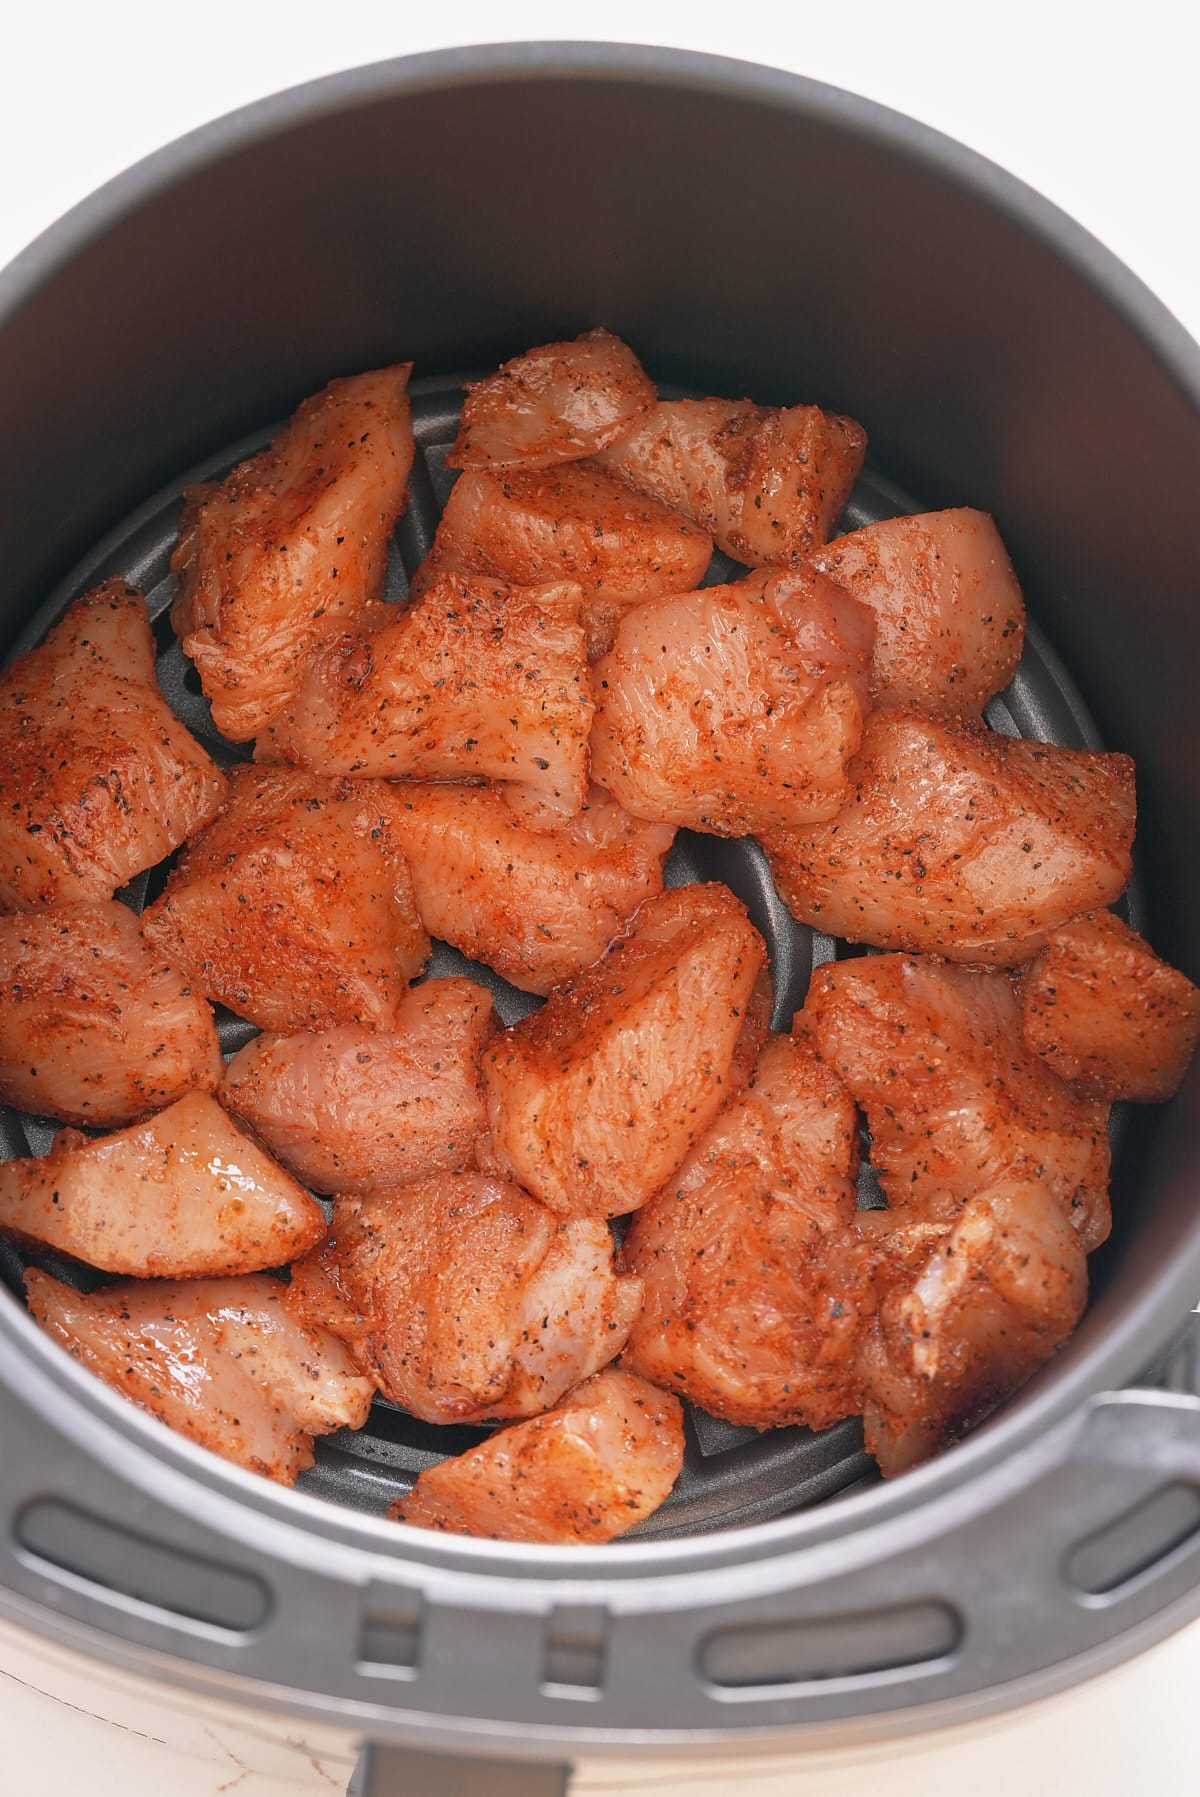 Spiced and seasoned chunks of chicken breast laid in a single layer in an air fryer basket.